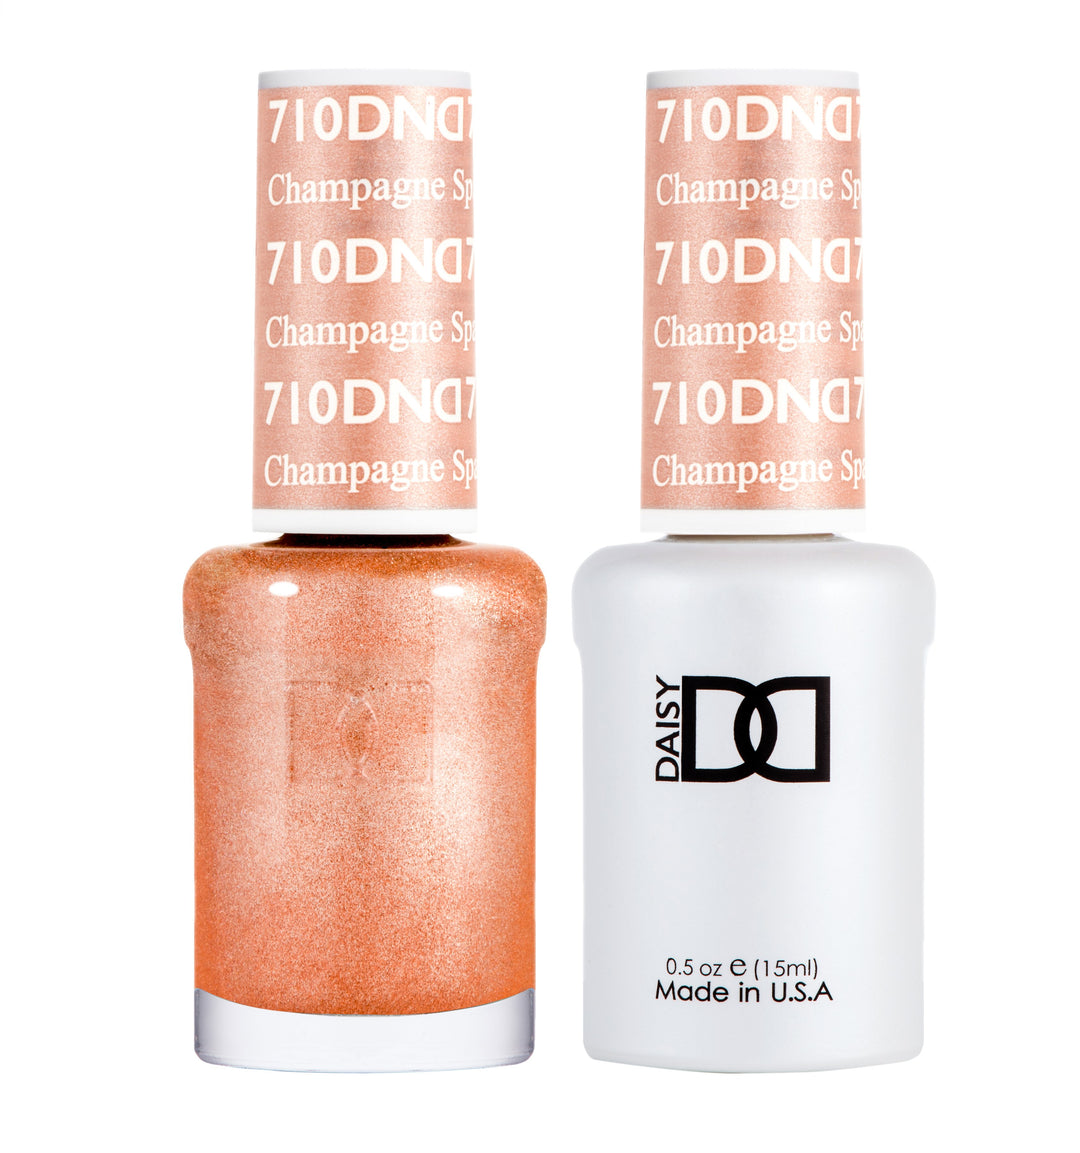 DND DUO Nail Lacquer and UV|LED Gel Polish Champagne Sparkles 710 (2 x 15ml)